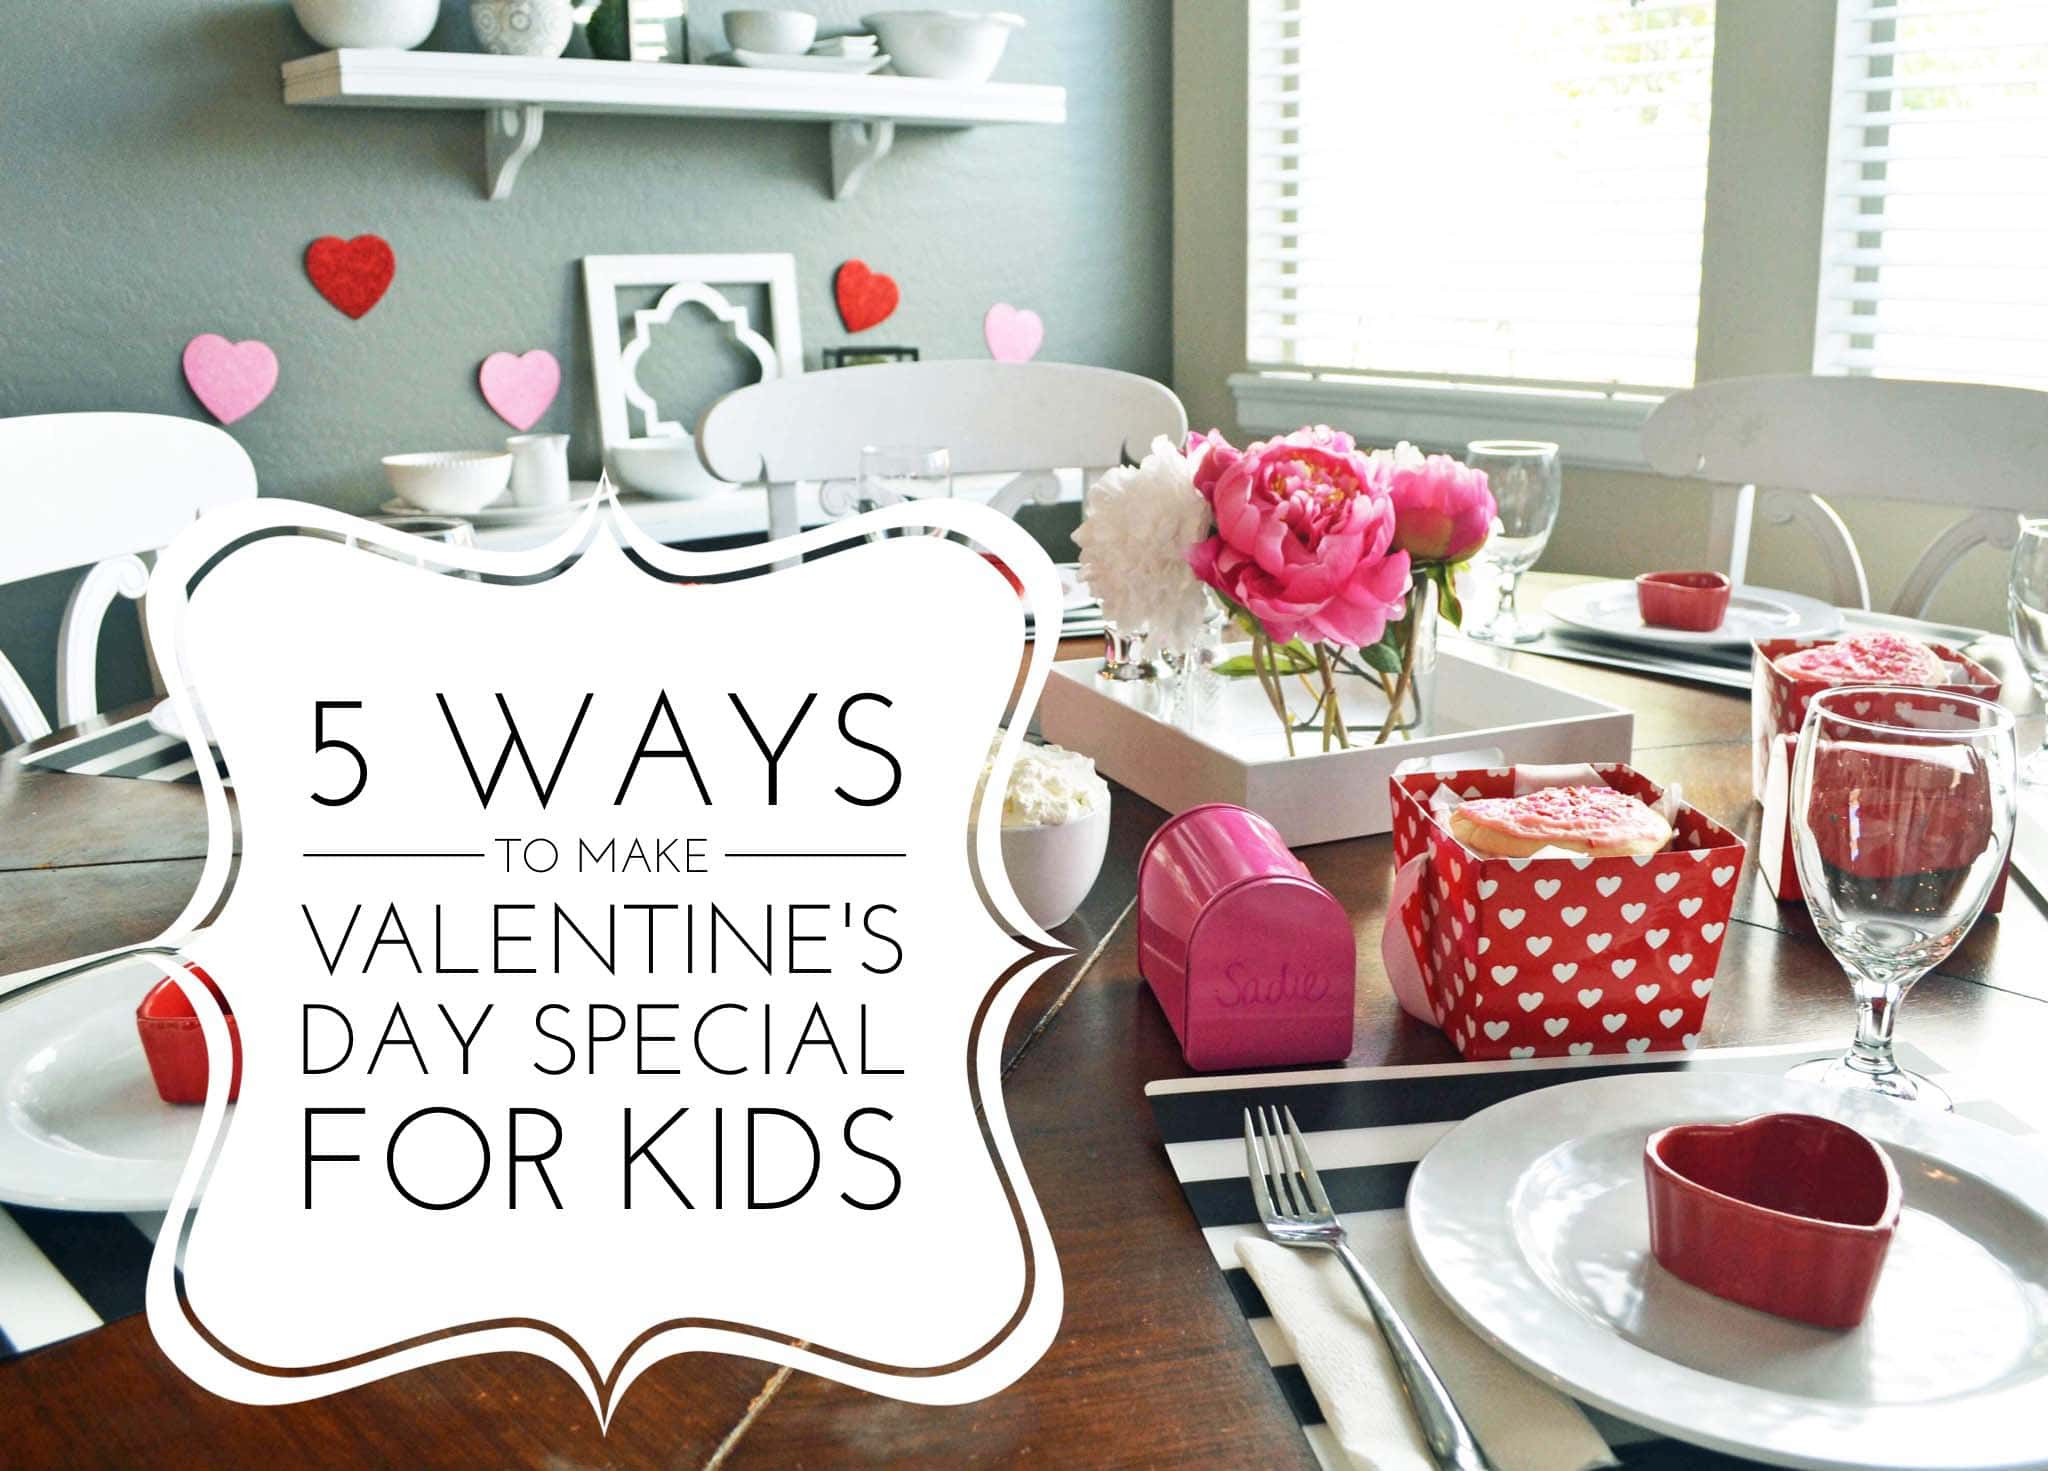 Gift Ideas For Kids For Valentines Day
 5 Ways to Make Valentine s Day Special for Kids